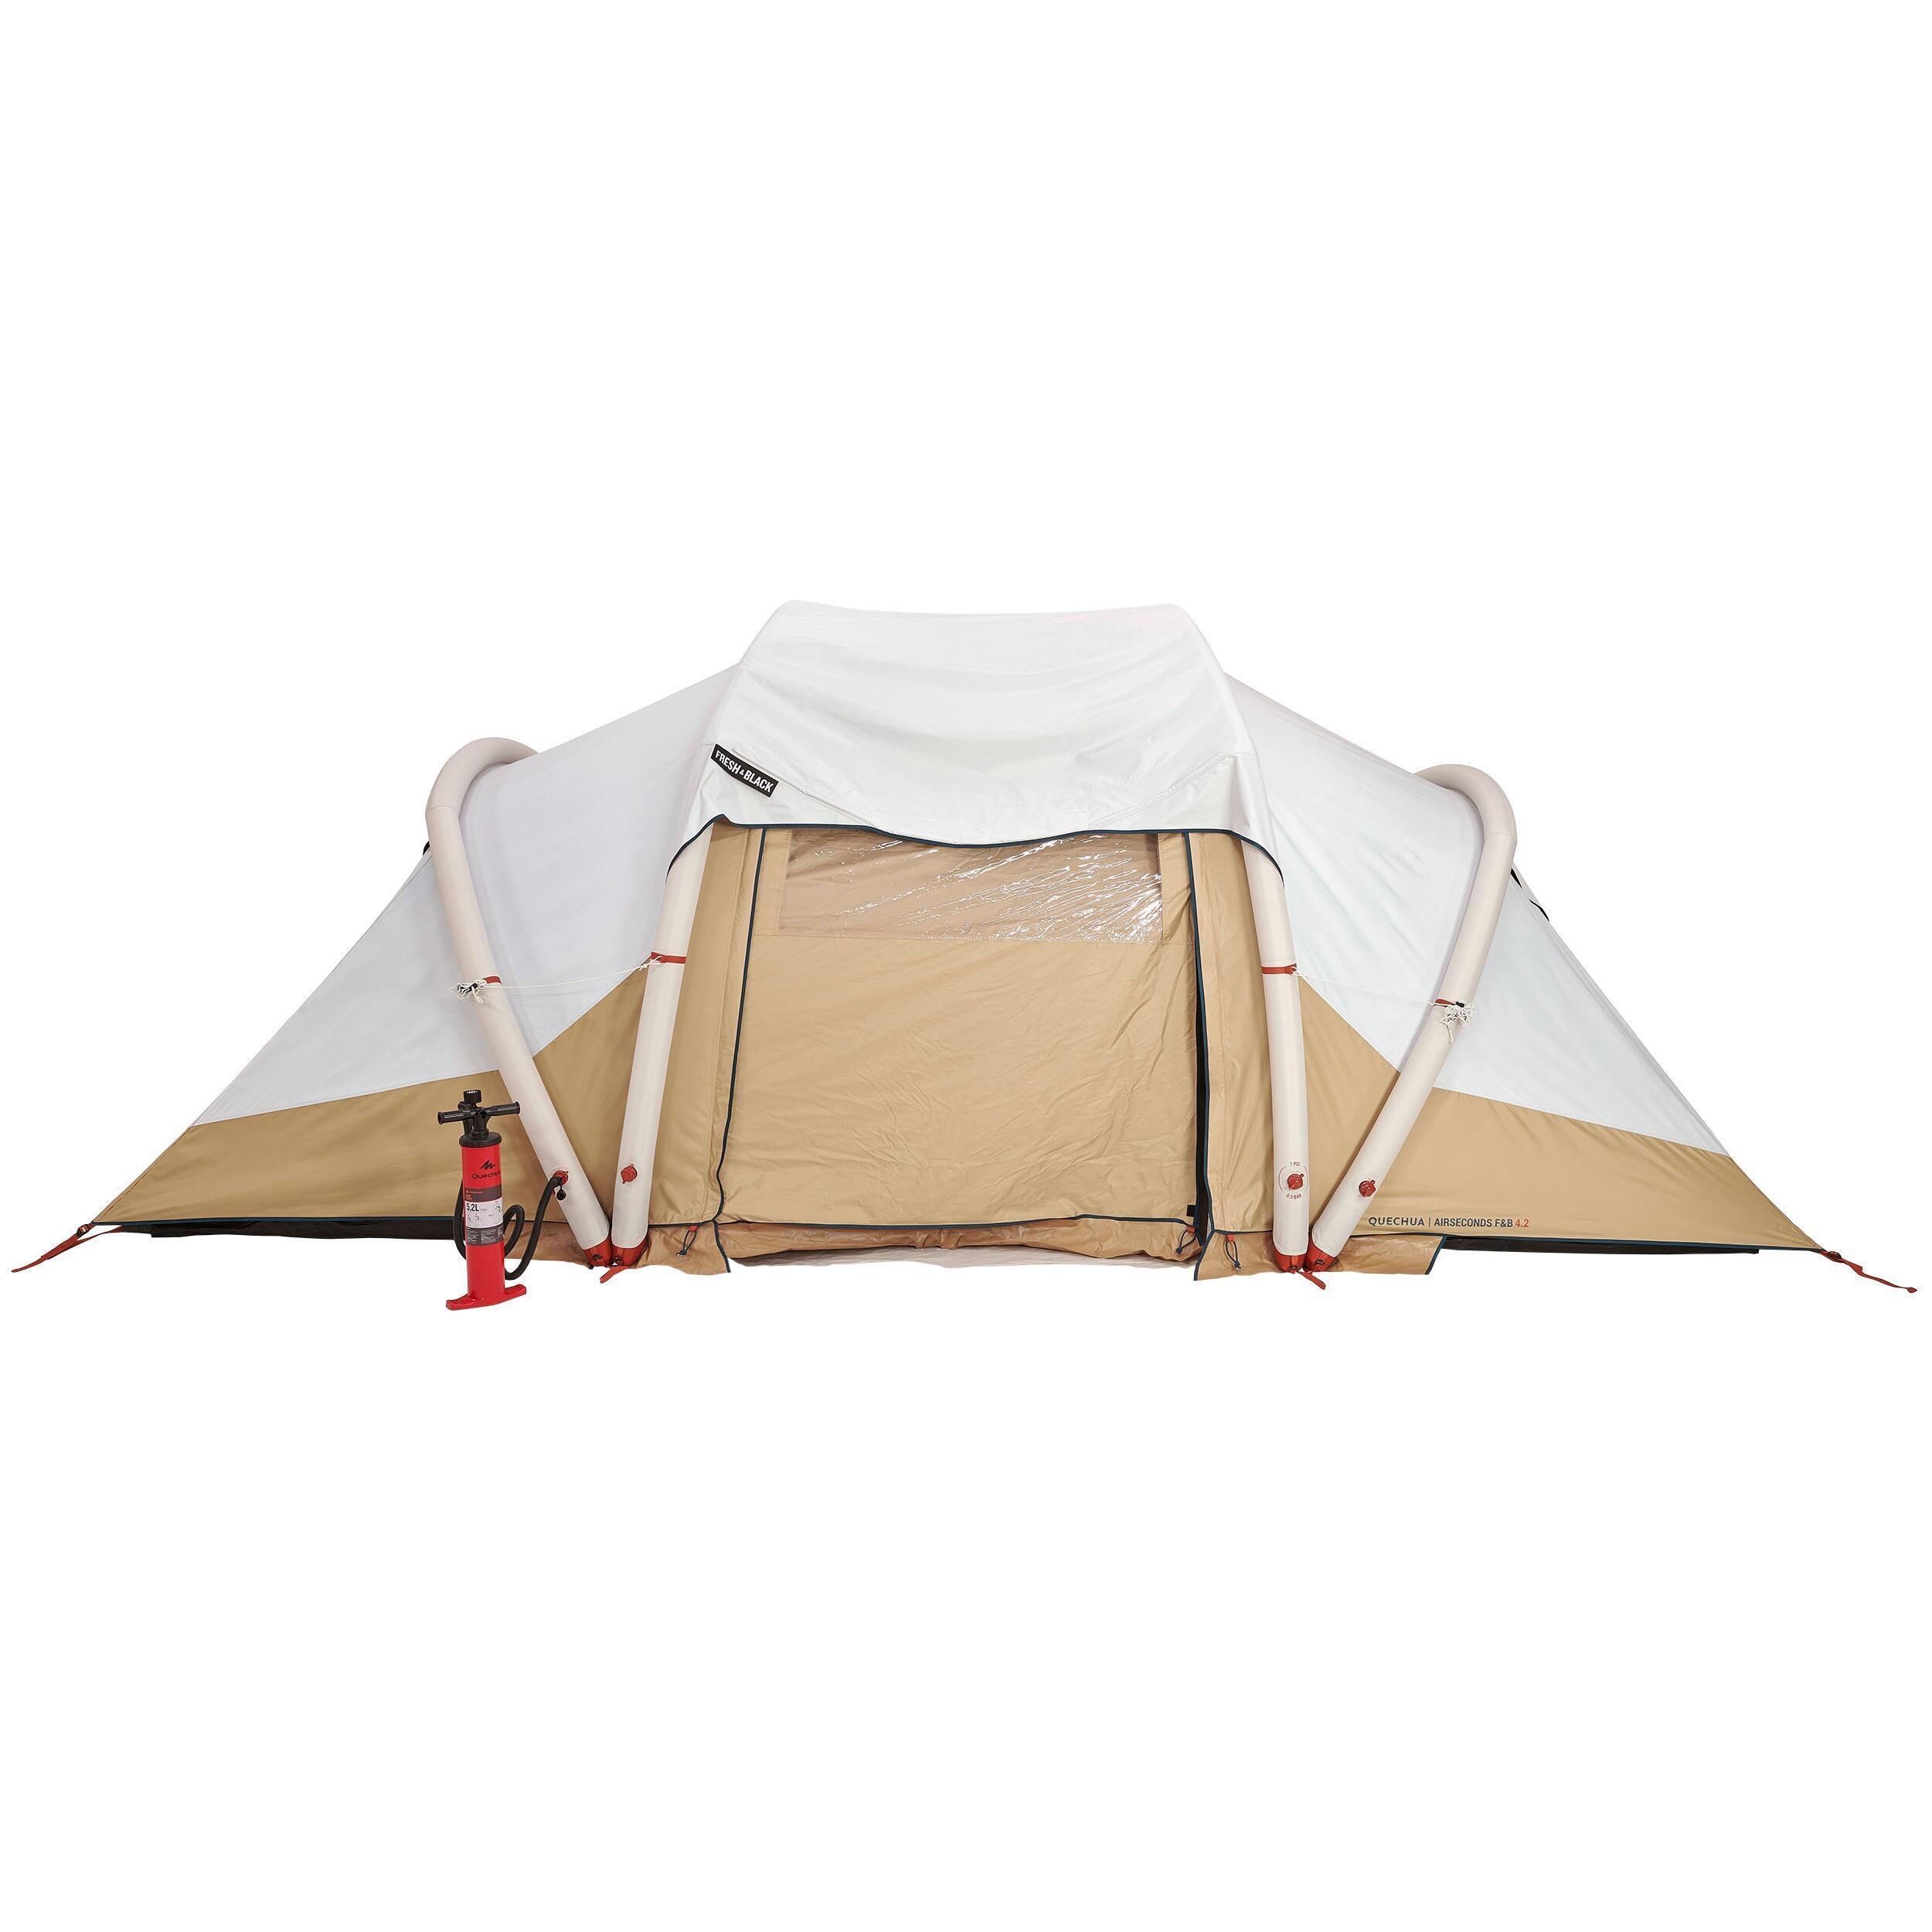 REFURBISHED FLYSHEET - SPARE PART FOR THE AIR SECONDS 4.2 TENT-A GRADE 3/5